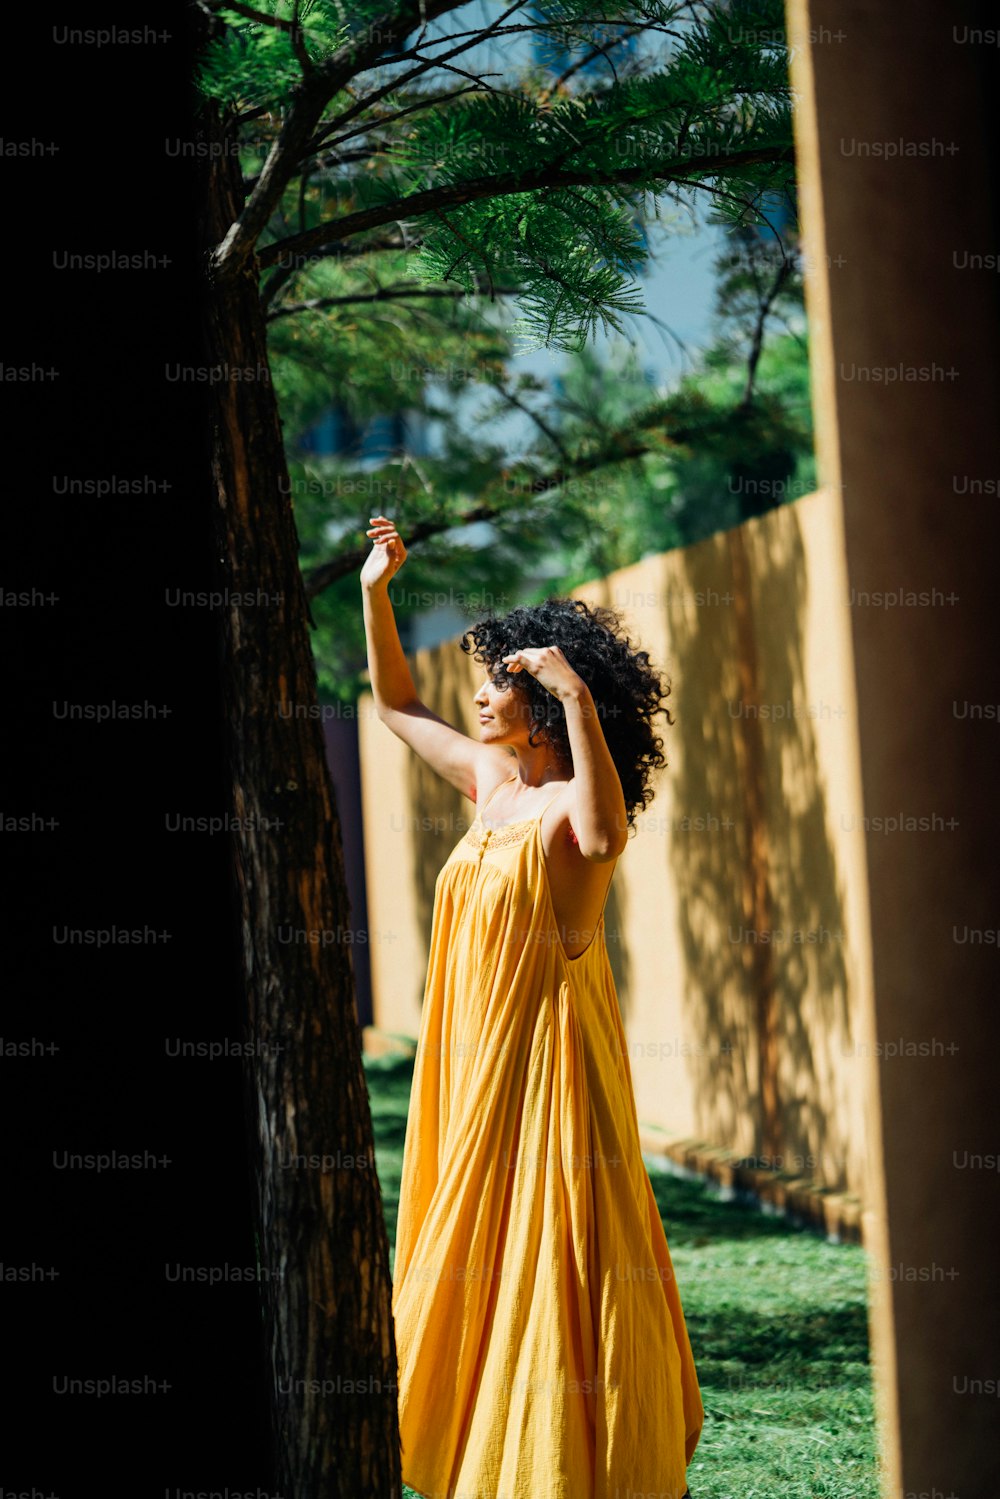 a woman in a yellow dress standing next to a tree